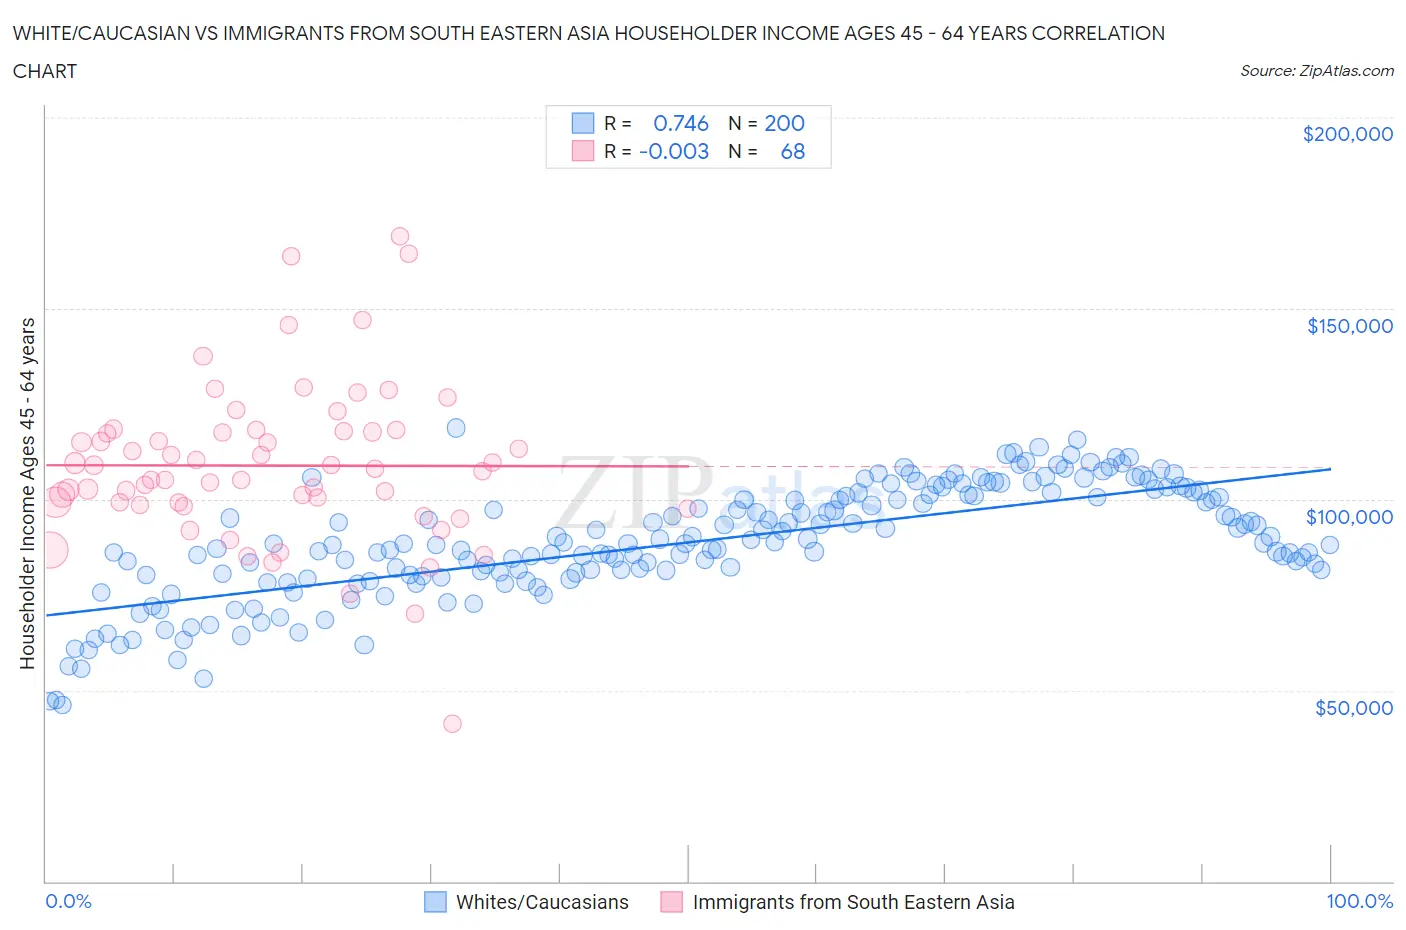 White/Caucasian vs Immigrants from South Eastern Asia Householder Income Ages 45 - 64 years